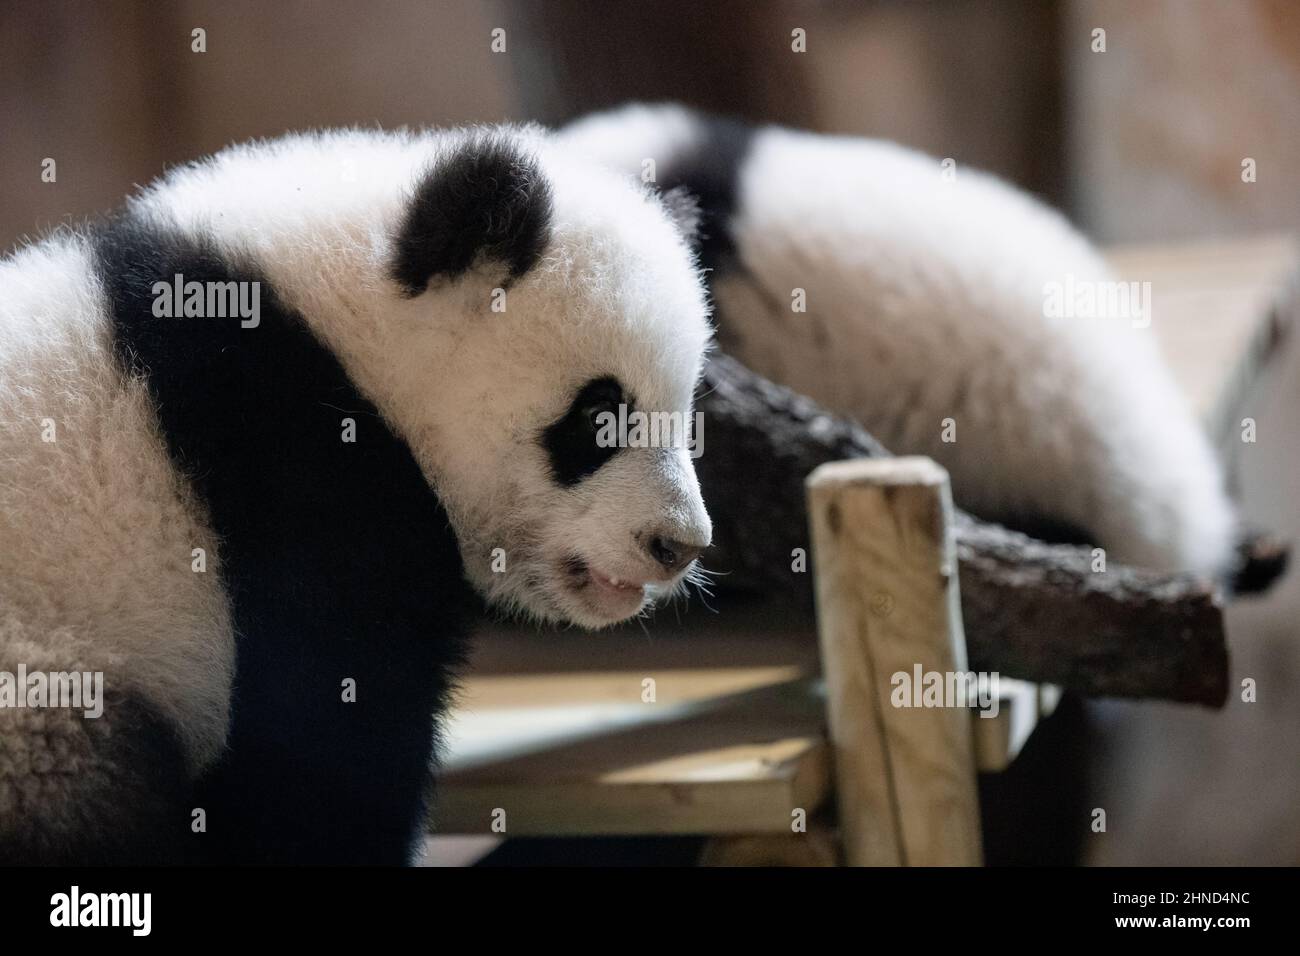 Face portrait of a young five month old panda cub at the zoo looking at ...